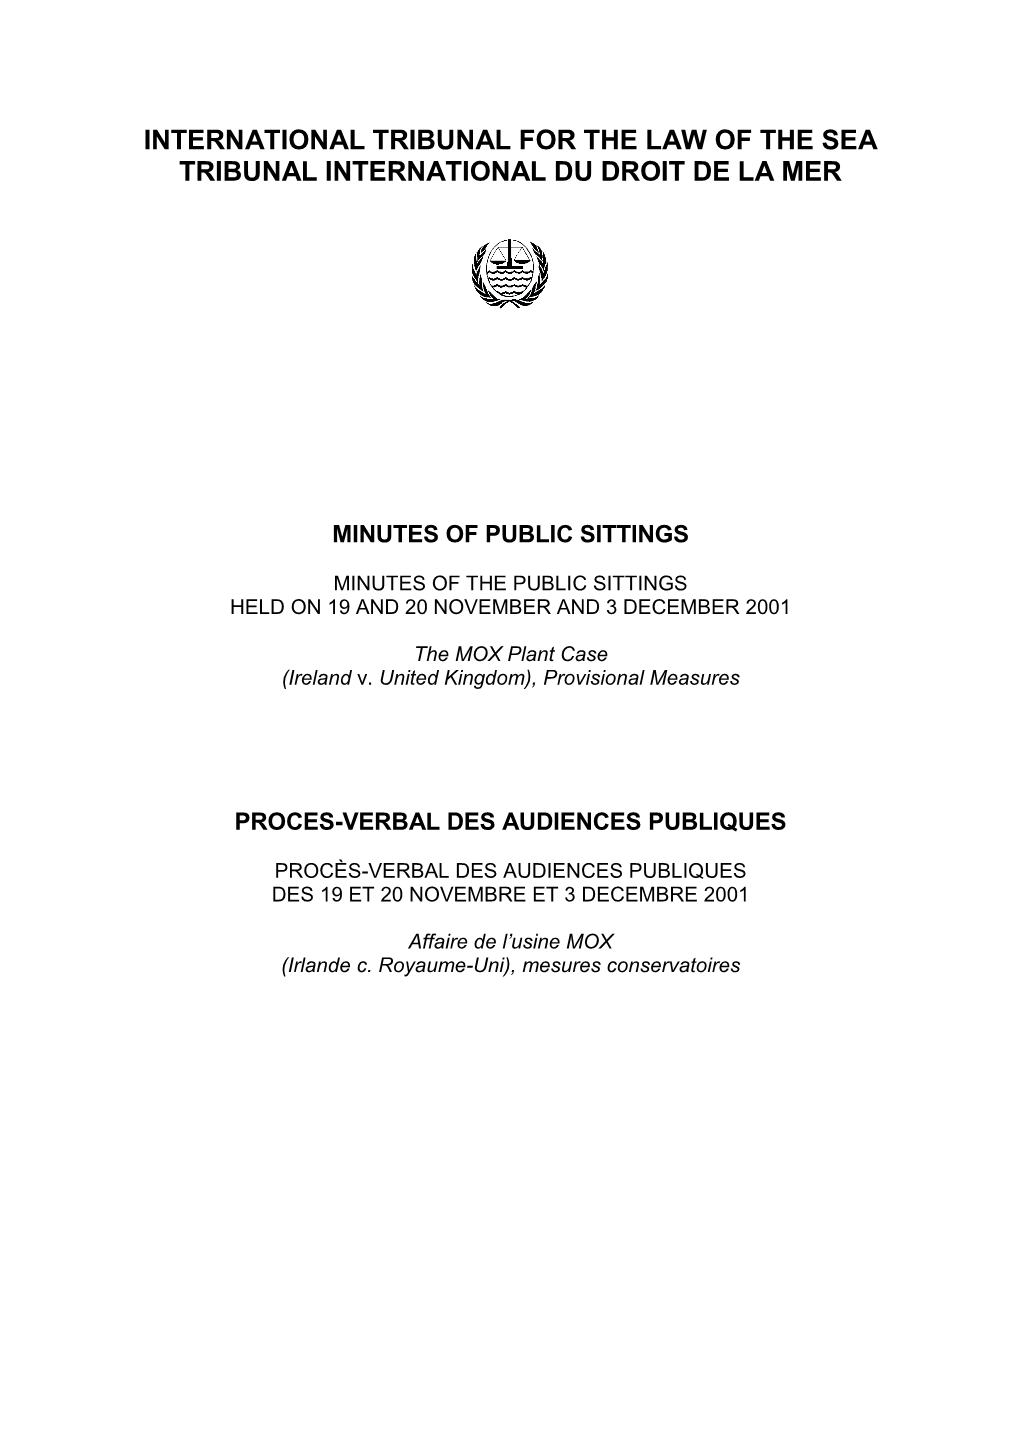 Minutes of Public Hearings